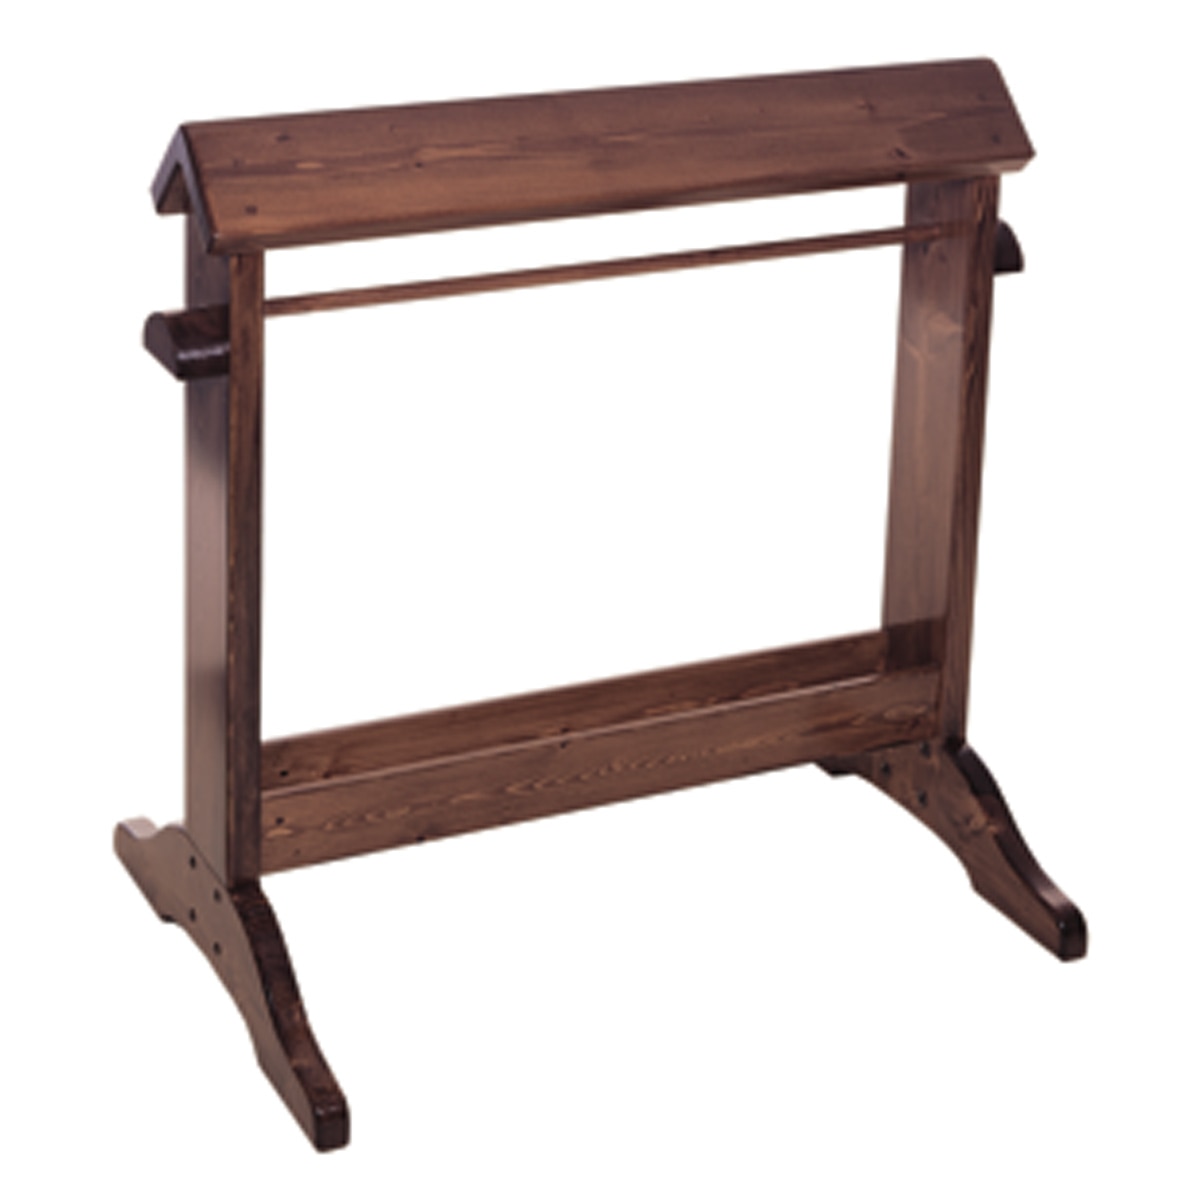 Wooden Saddle Stand natural finish FREE SHIPPING! 